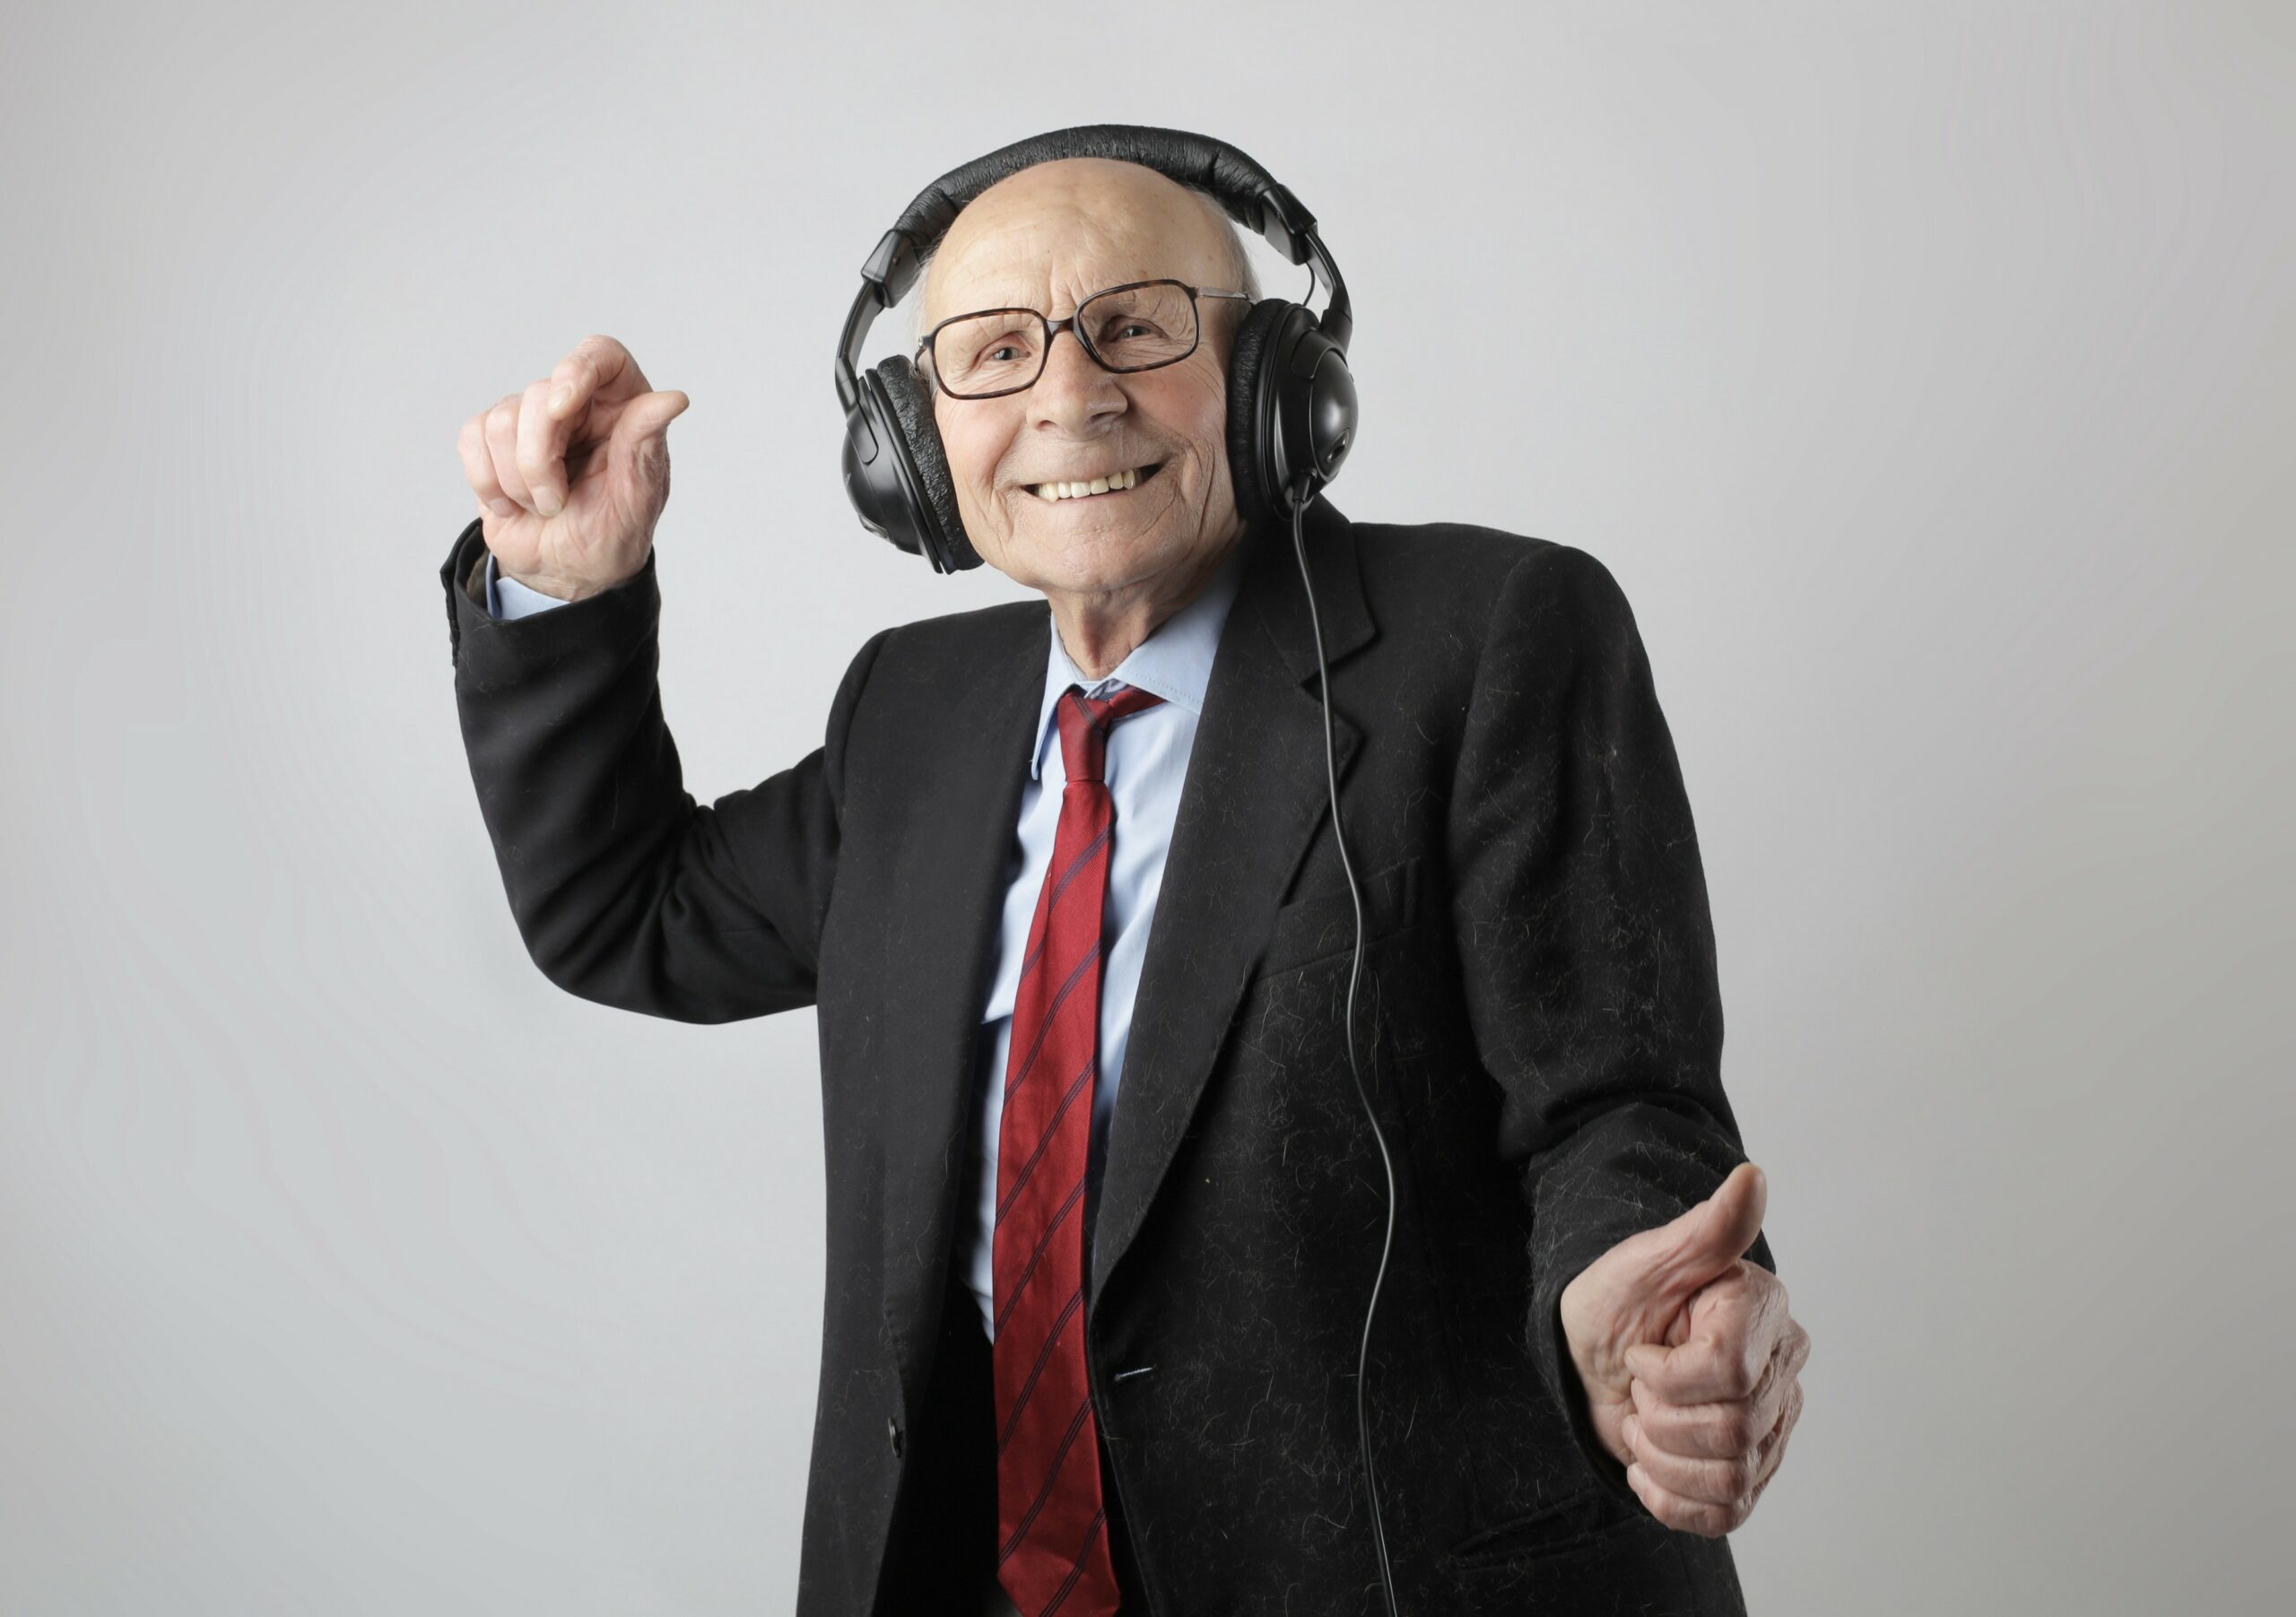 An old man in a suit is dancing. He is wearing large headphones, and is smiling at the camera.